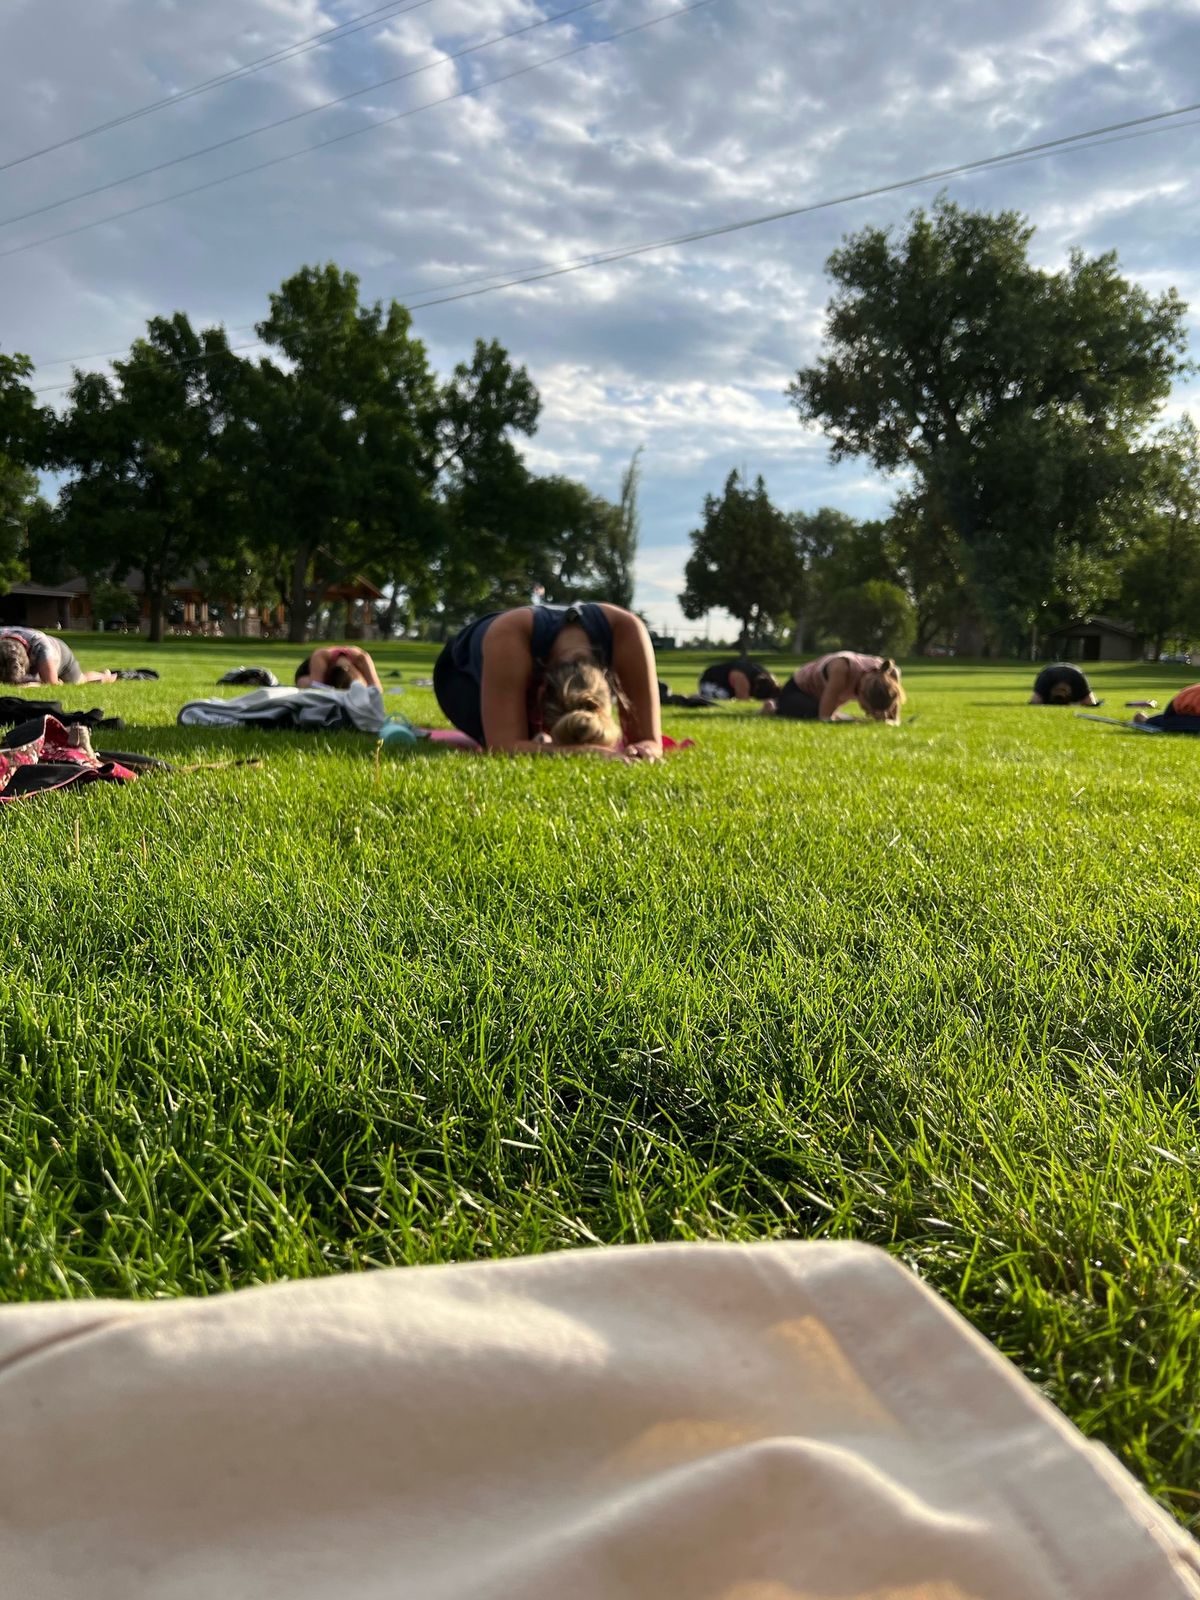 Summer Yoga in the Park